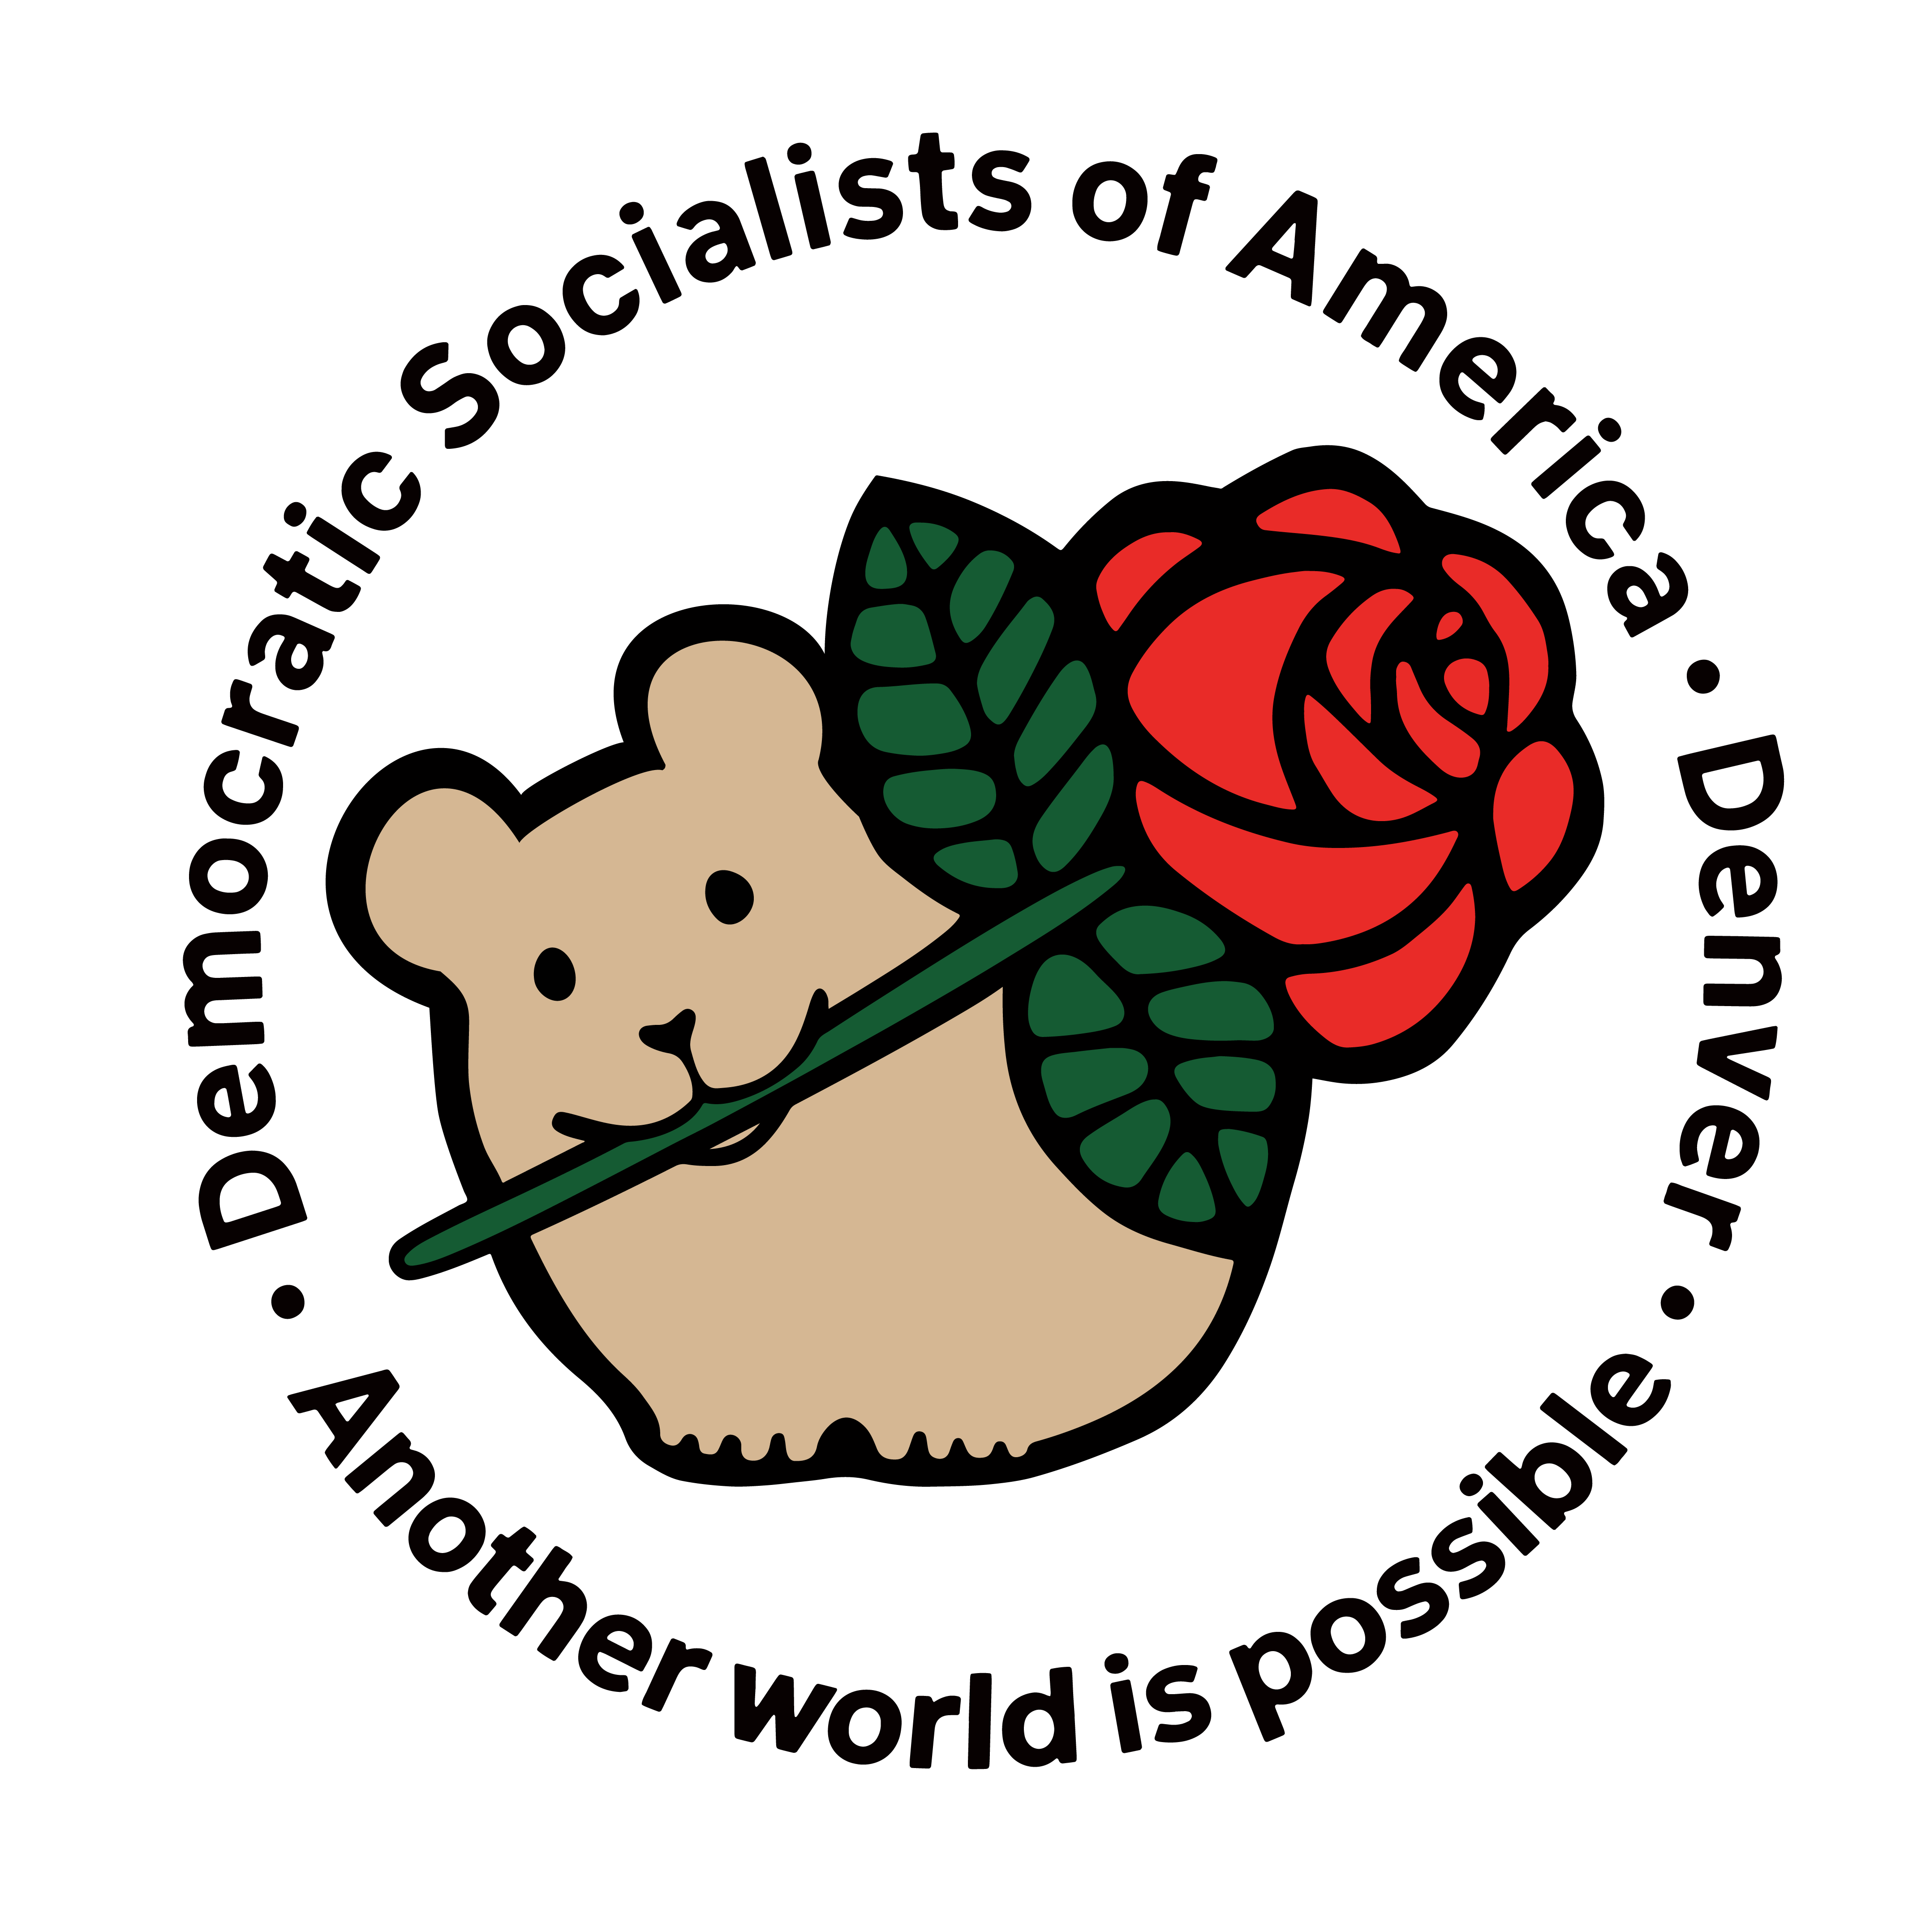 The Denver DSA logo: a drawing of a pika with a rose in its mouth, with text 'Democratic Socialists of America - Denver - Another world is possible